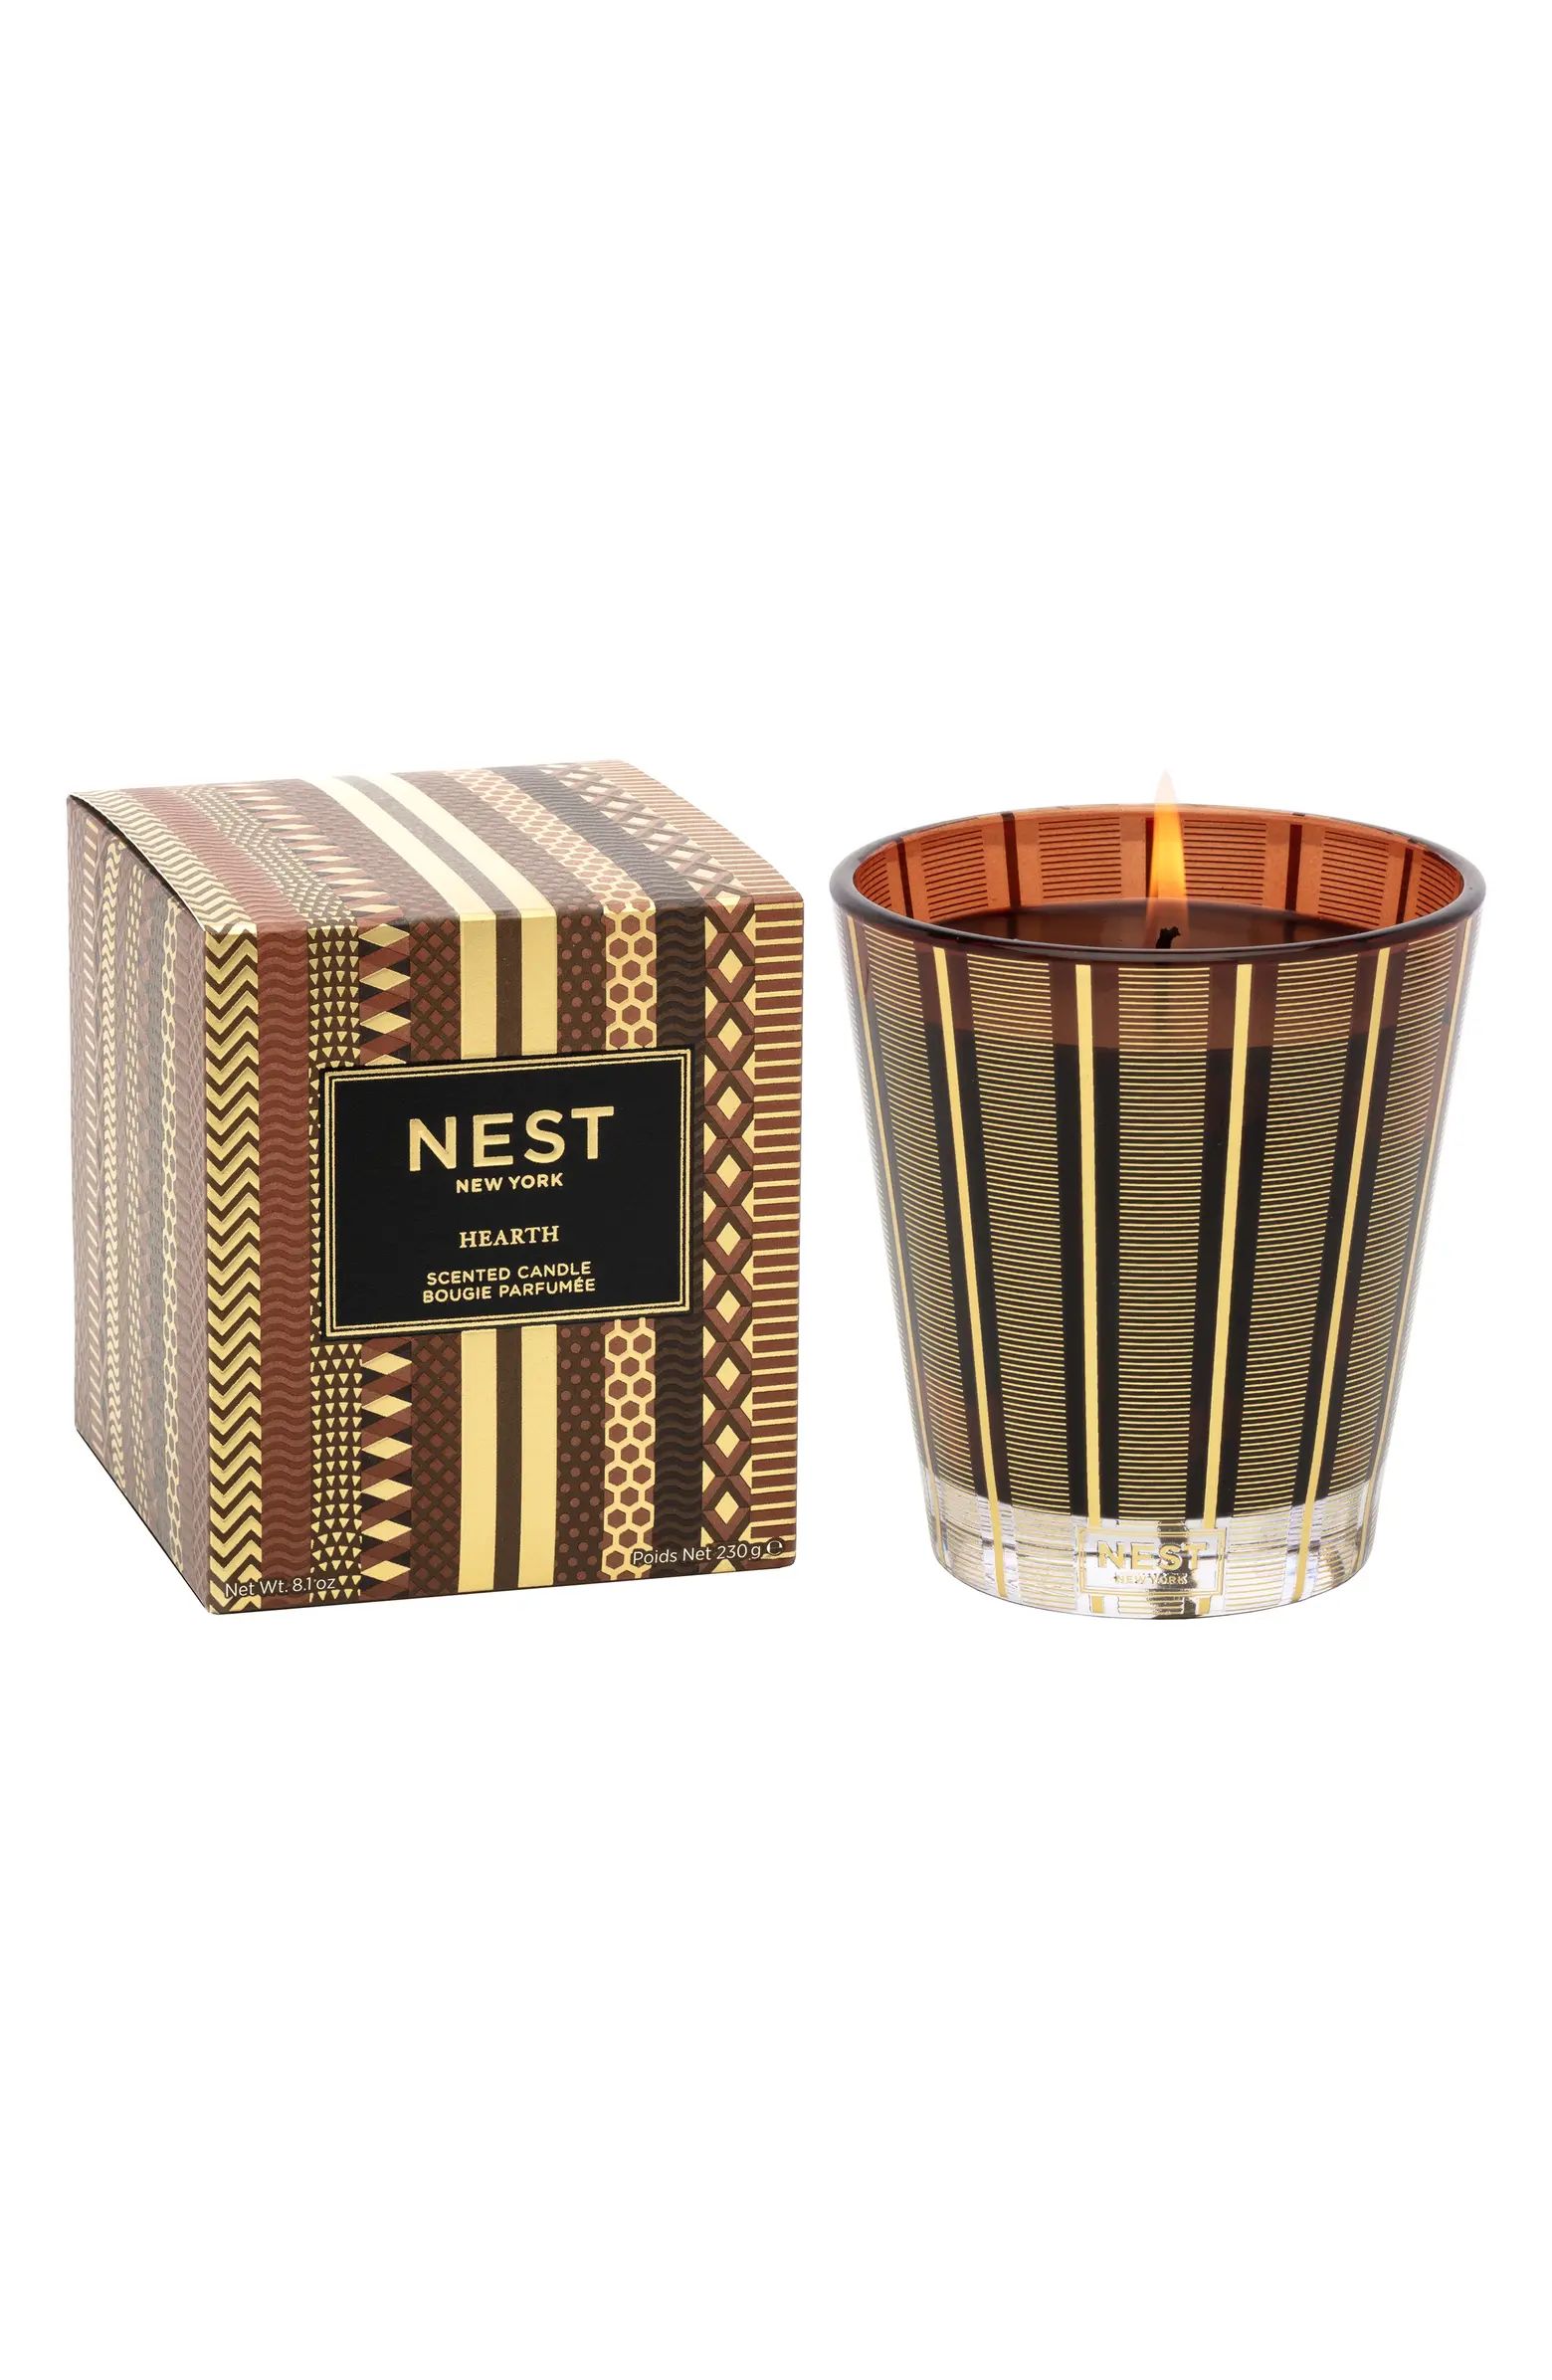 Hearth Scented Candle | Nordstrom